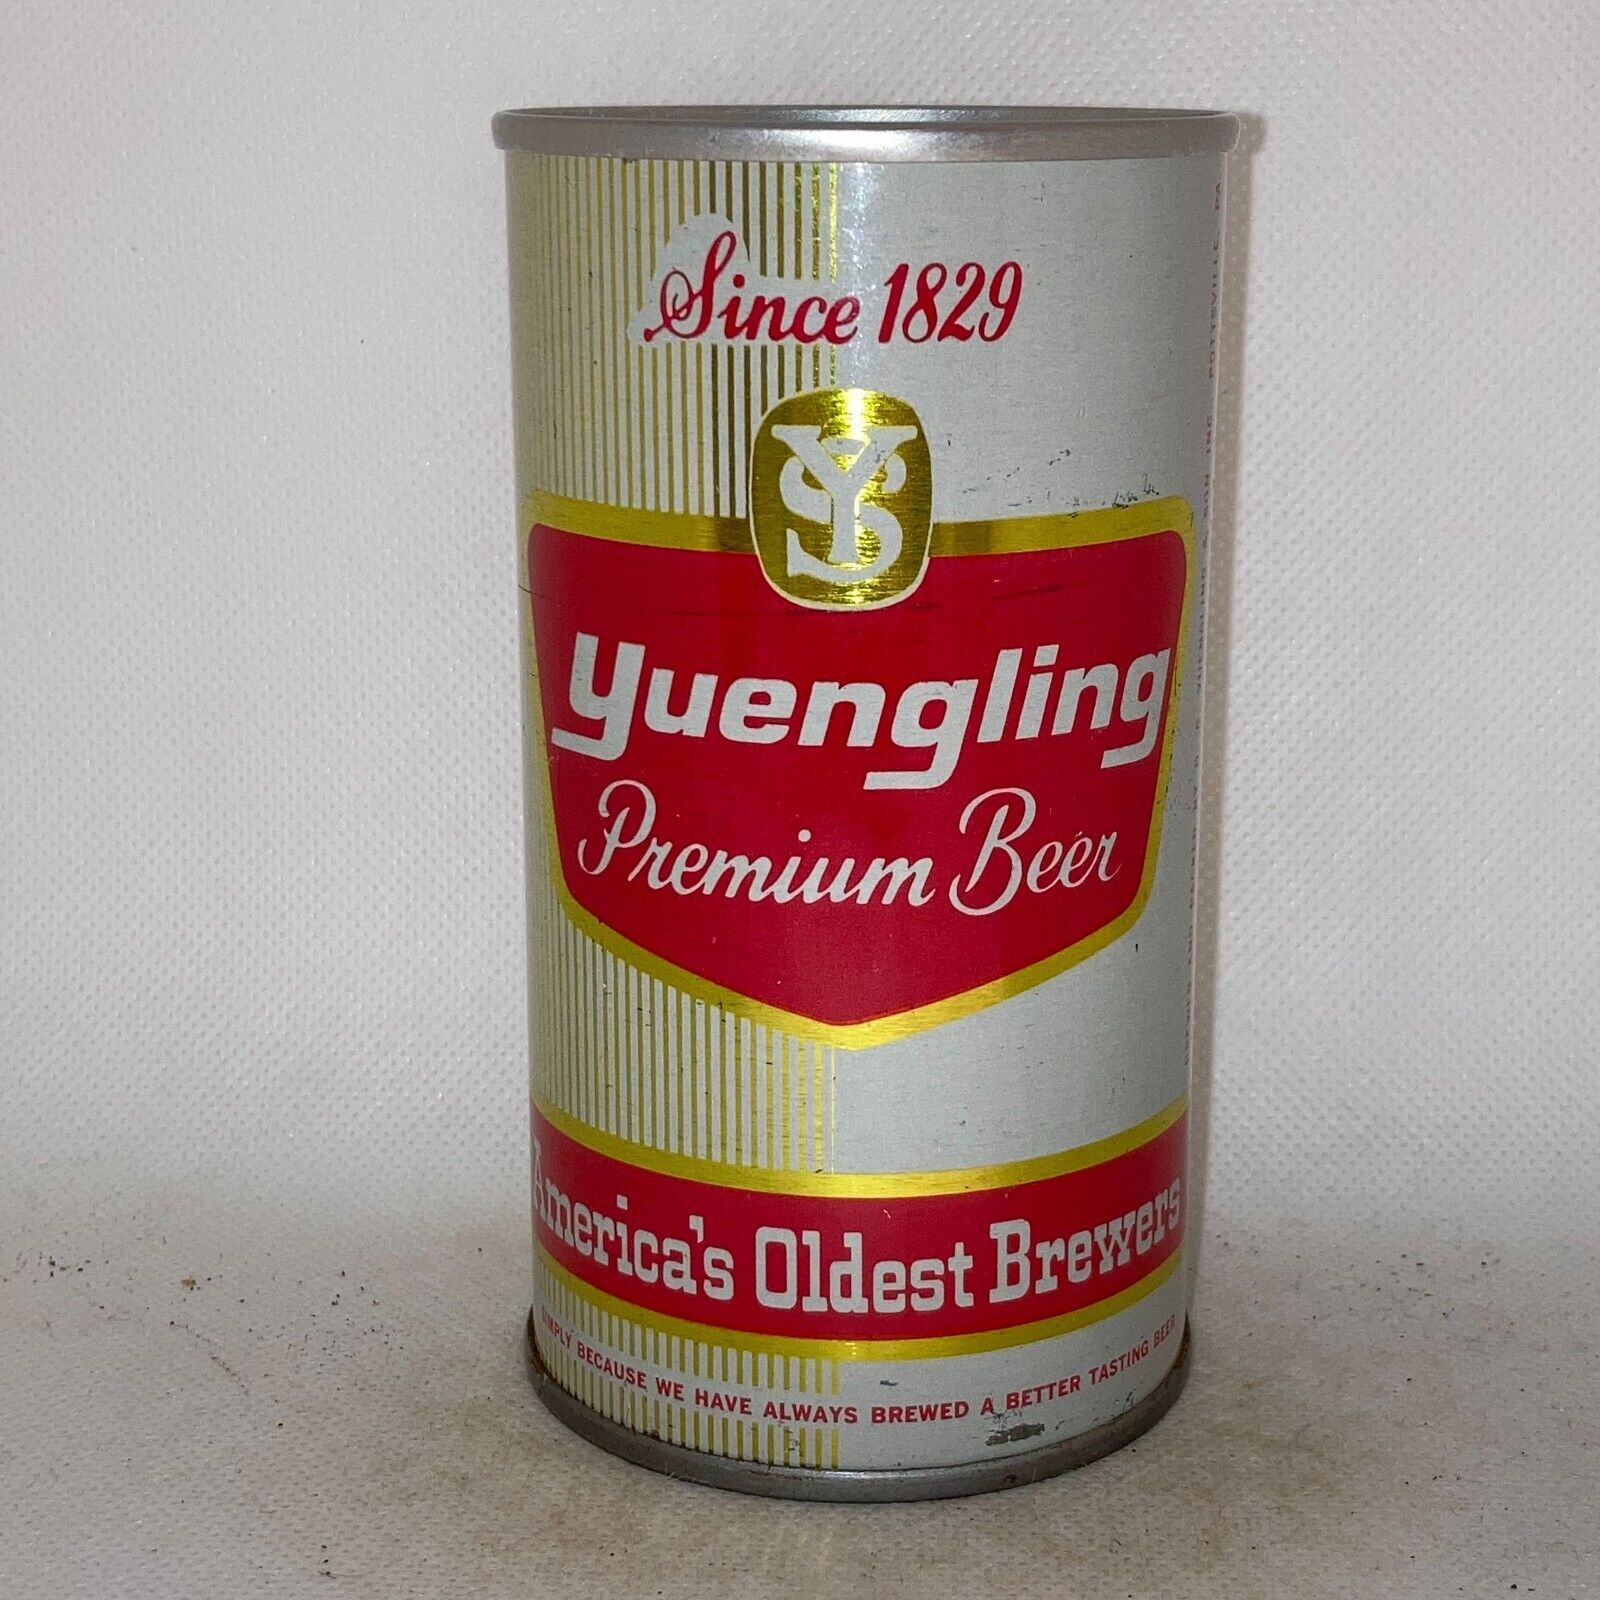 Yuengling beer can